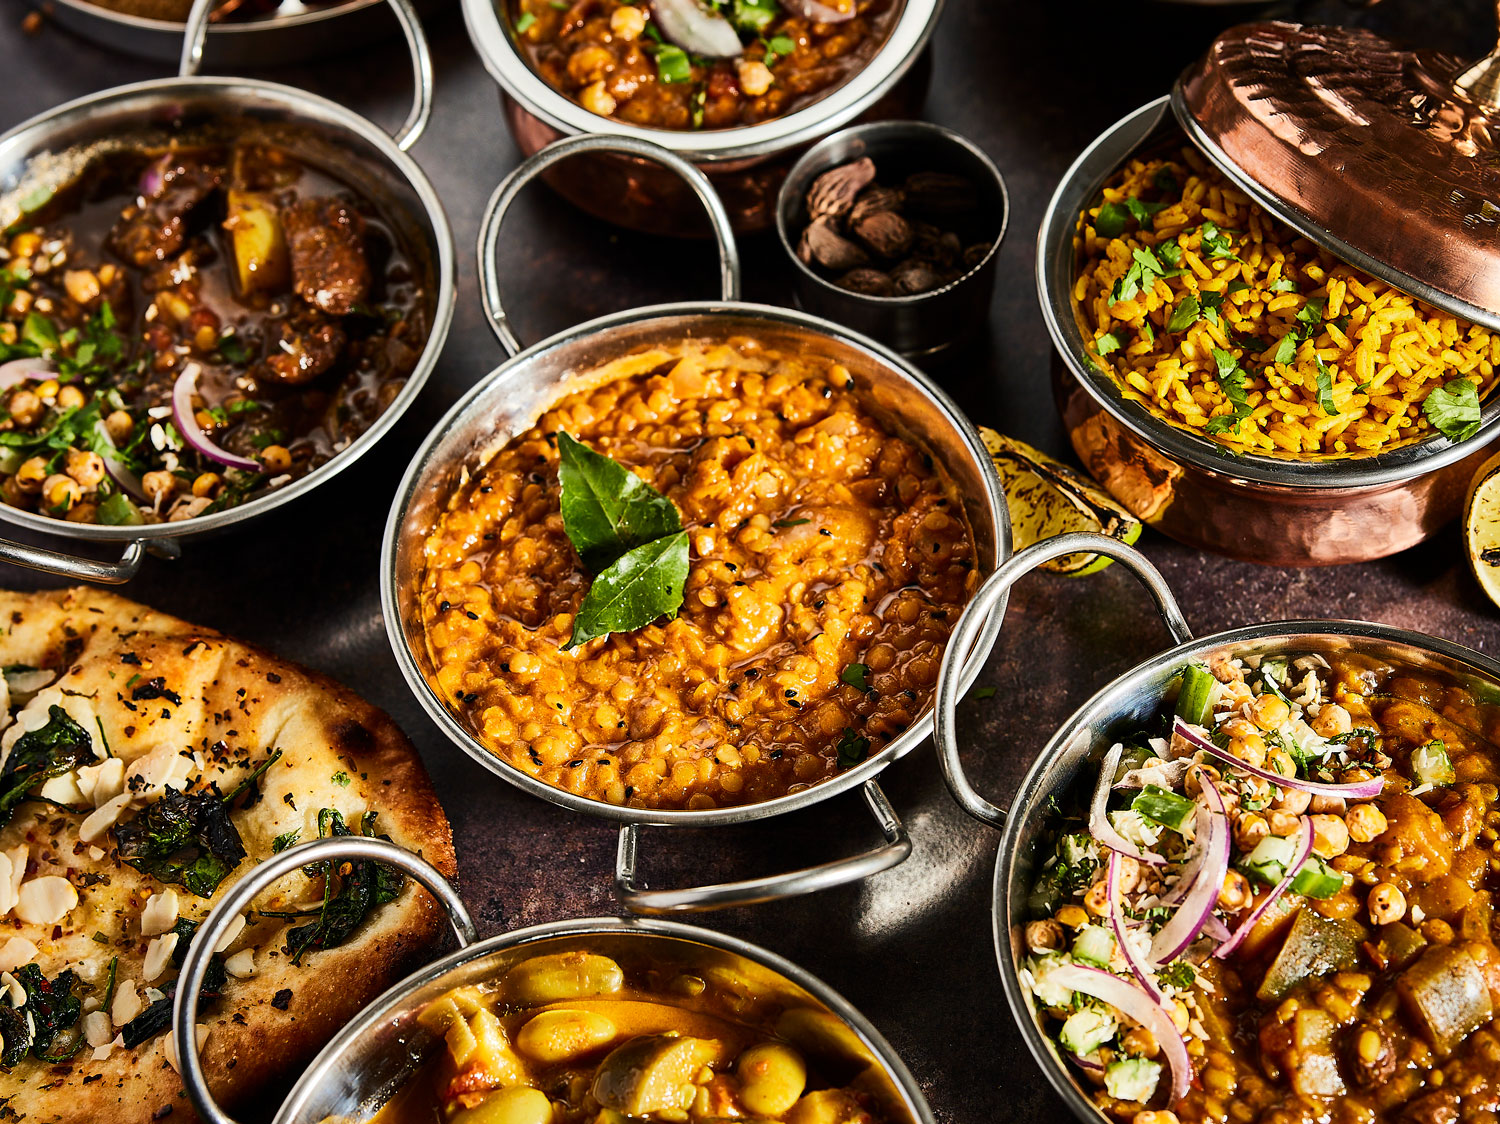 TUGO fires up foodservice with The Urban Rajah